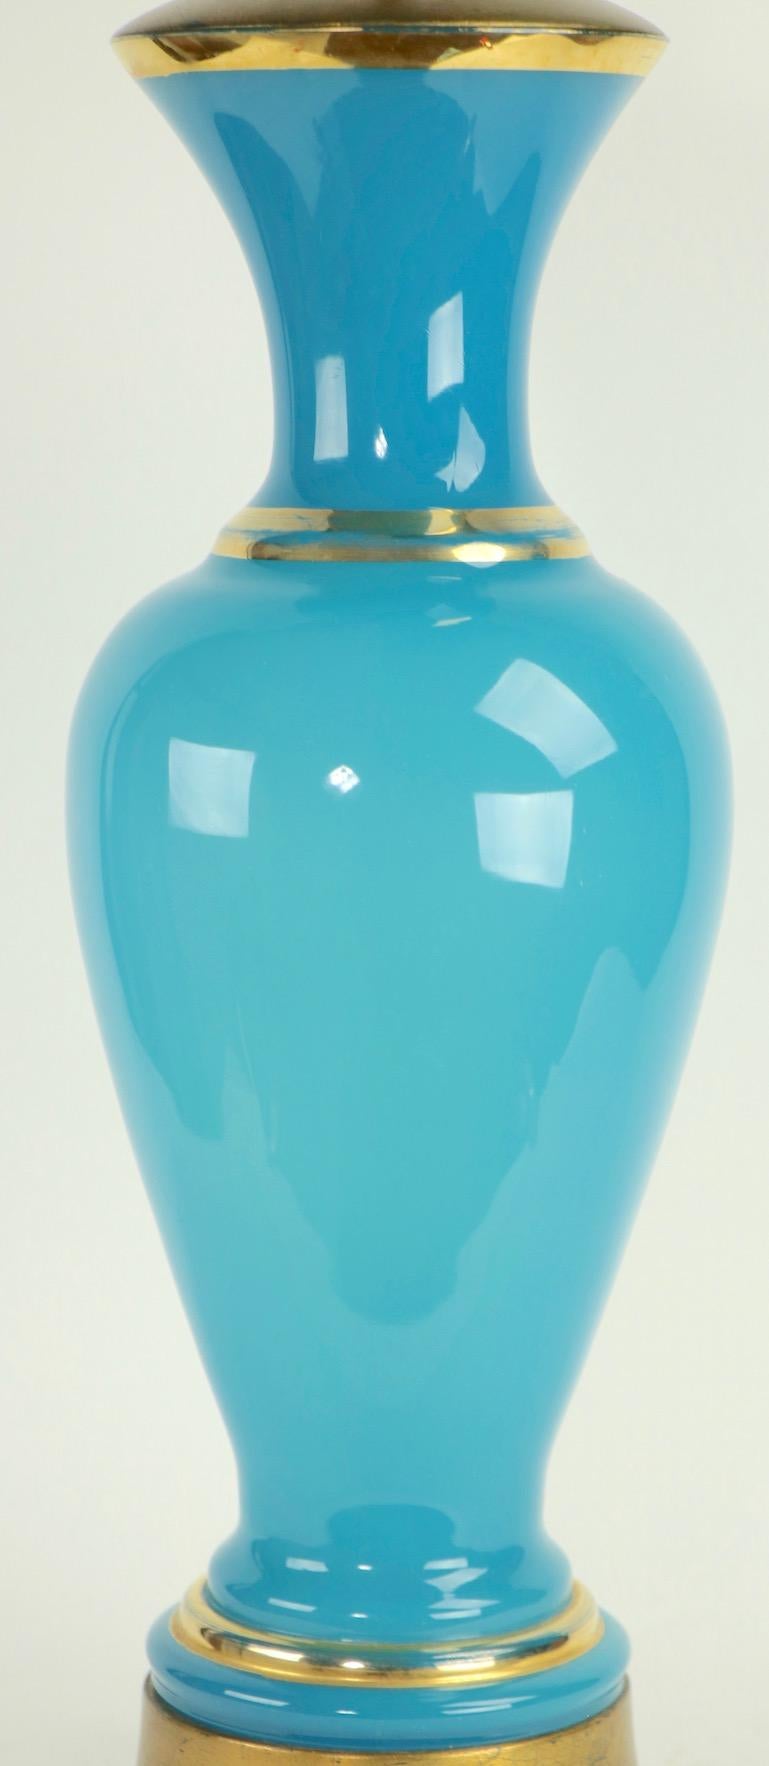 Striking blue opaline table lamp with gold trim. This impressive lamp is in very fine, original and working condition (rewired). It accepts two standard size screw in bulbs, shade not included. H to top of glass element 23 in x total H 37 in x